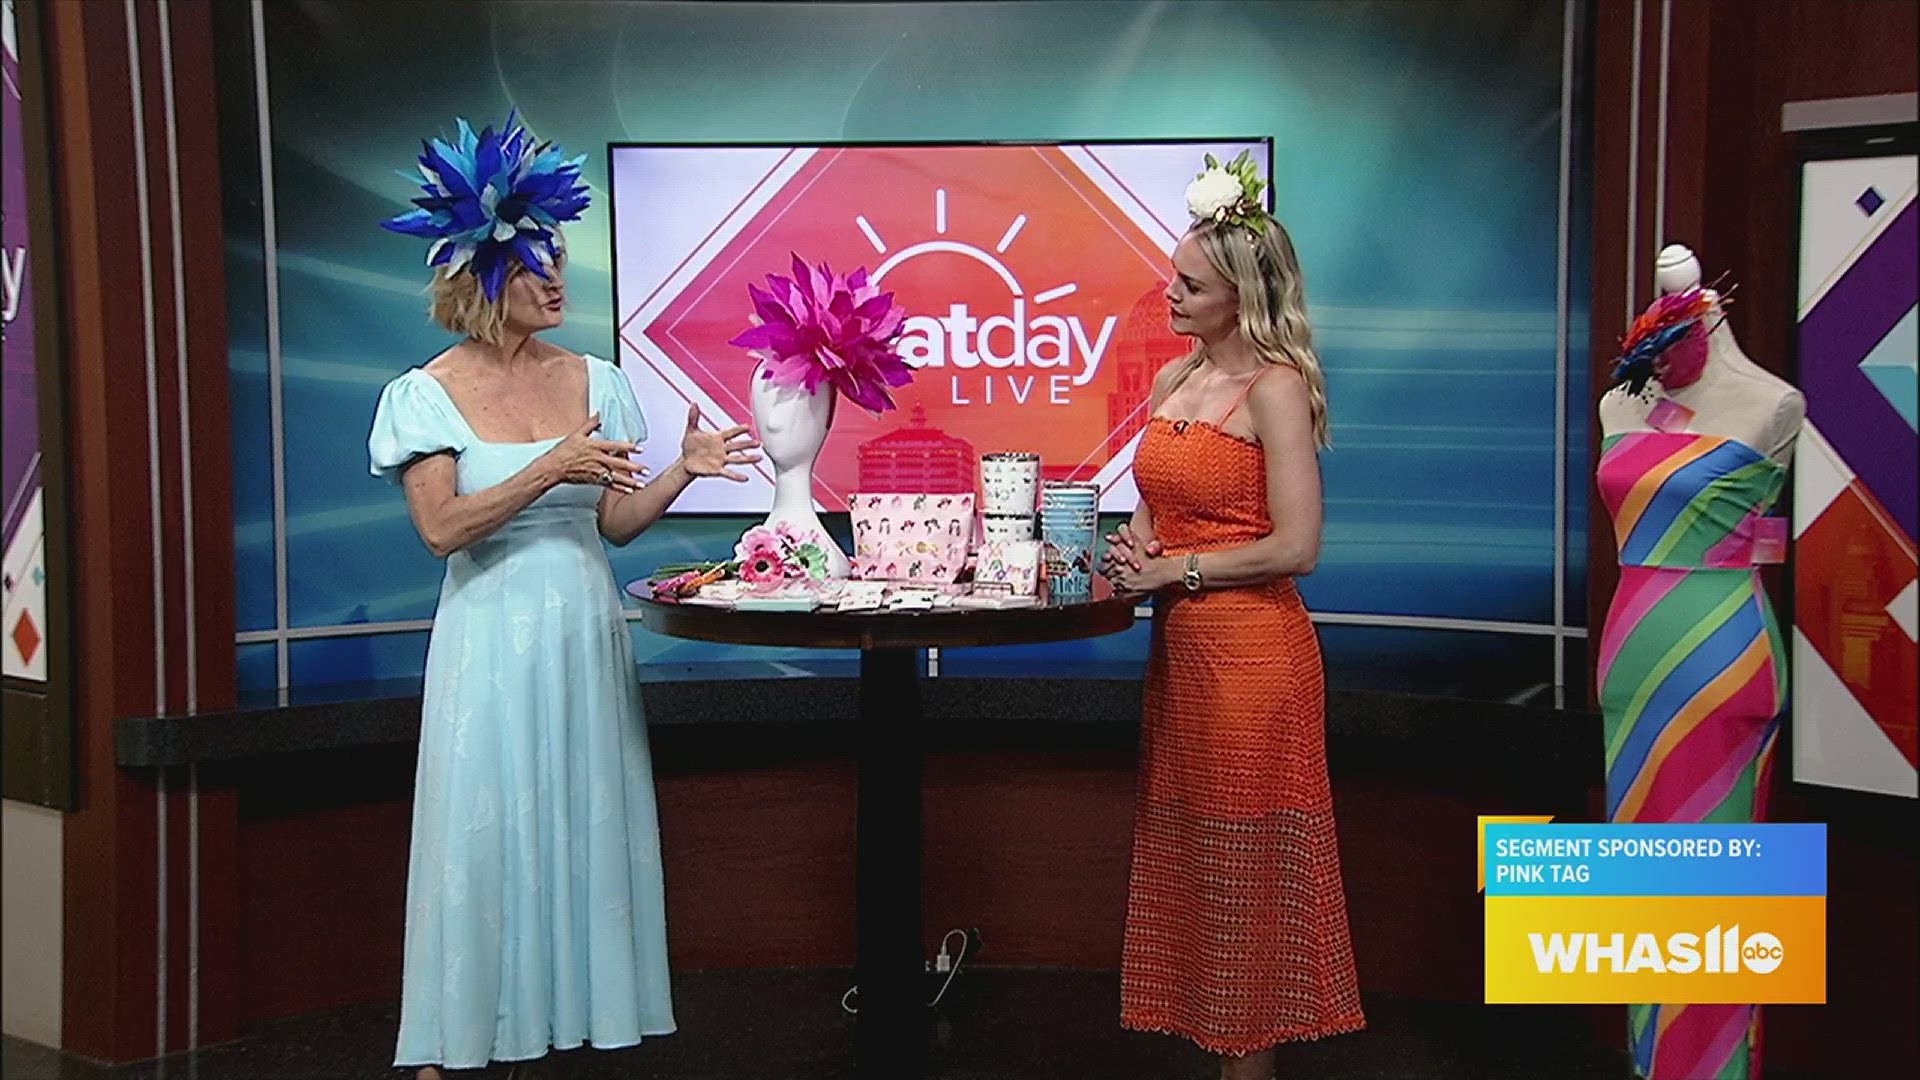 From great dresses, hats, and accessories, Pink Tag has everything you need for a great Derby outfit!